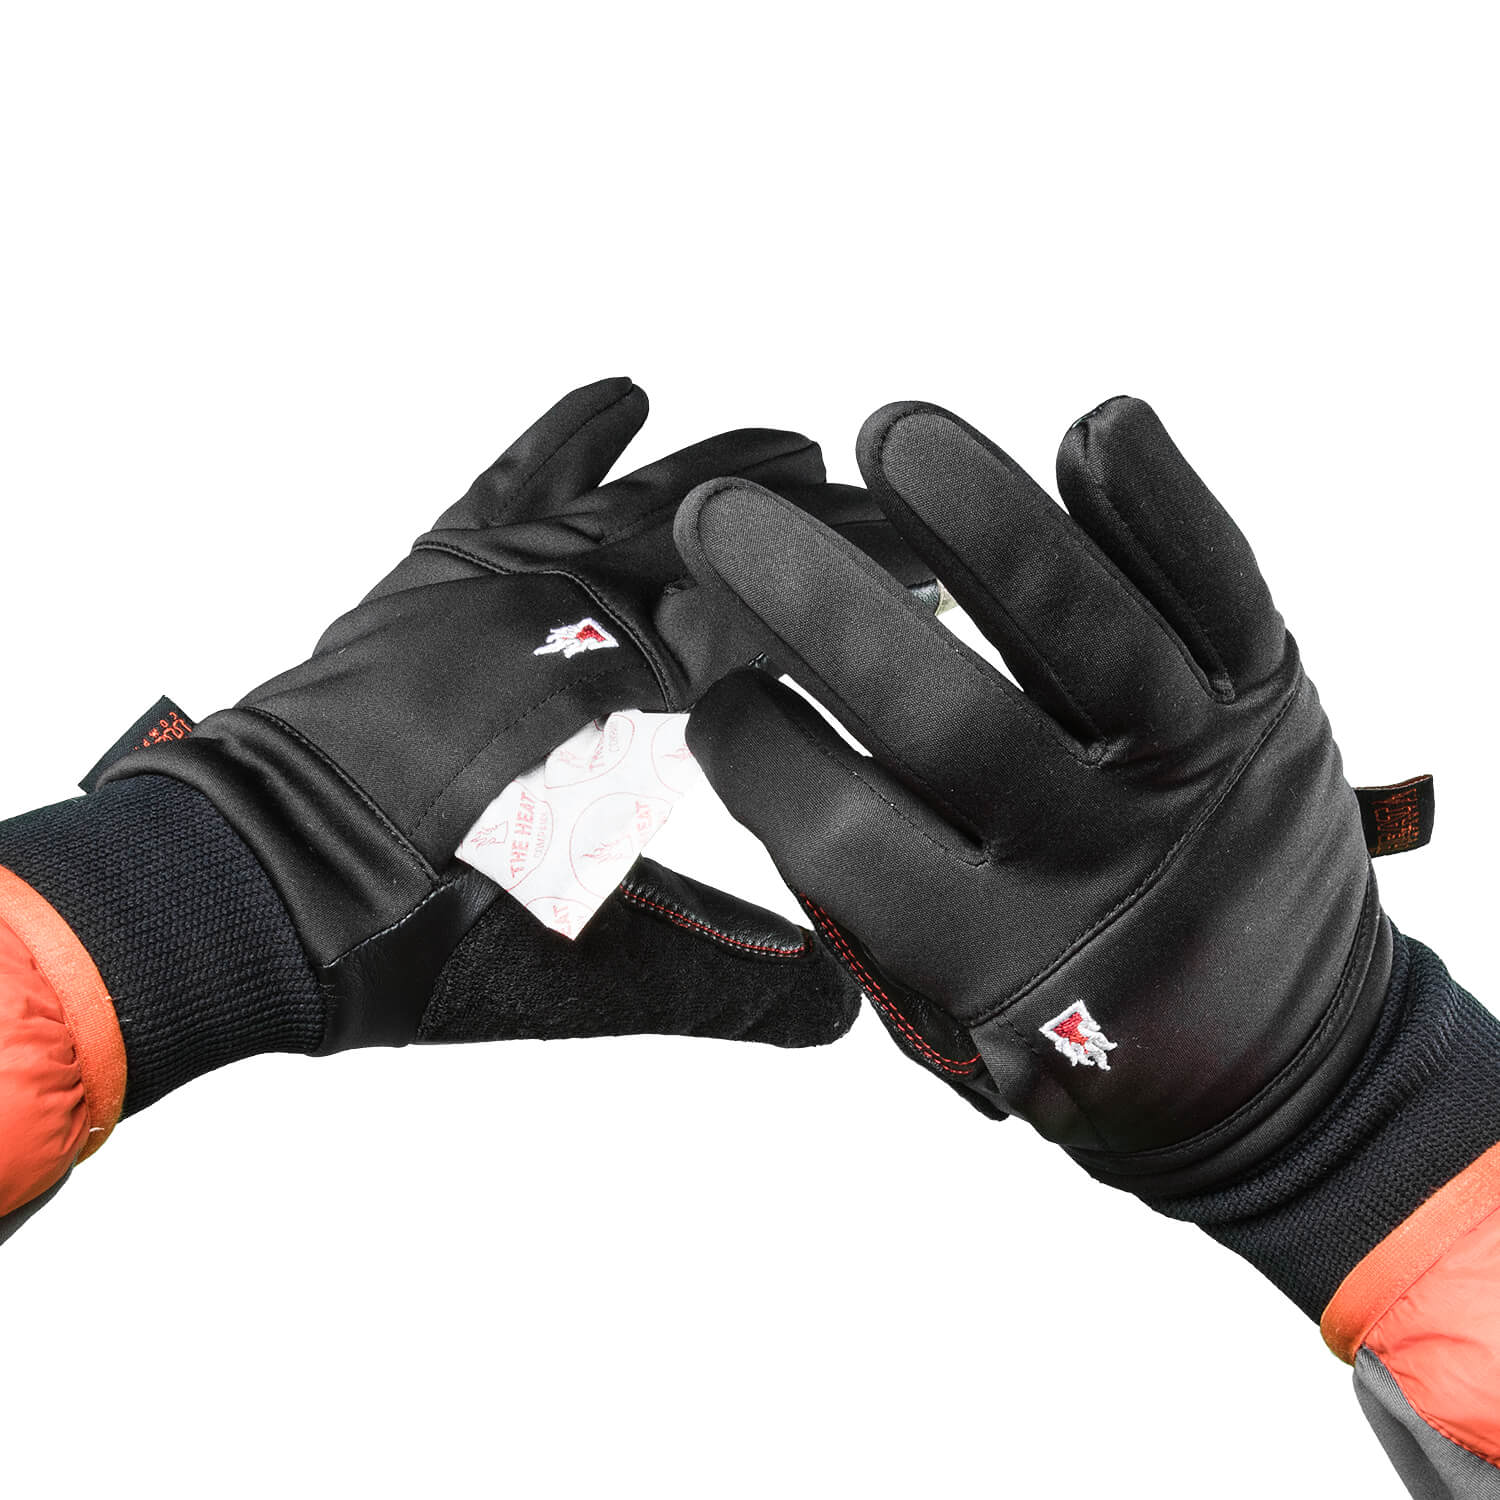 Durable Liner photographic gloves by The Heat Company